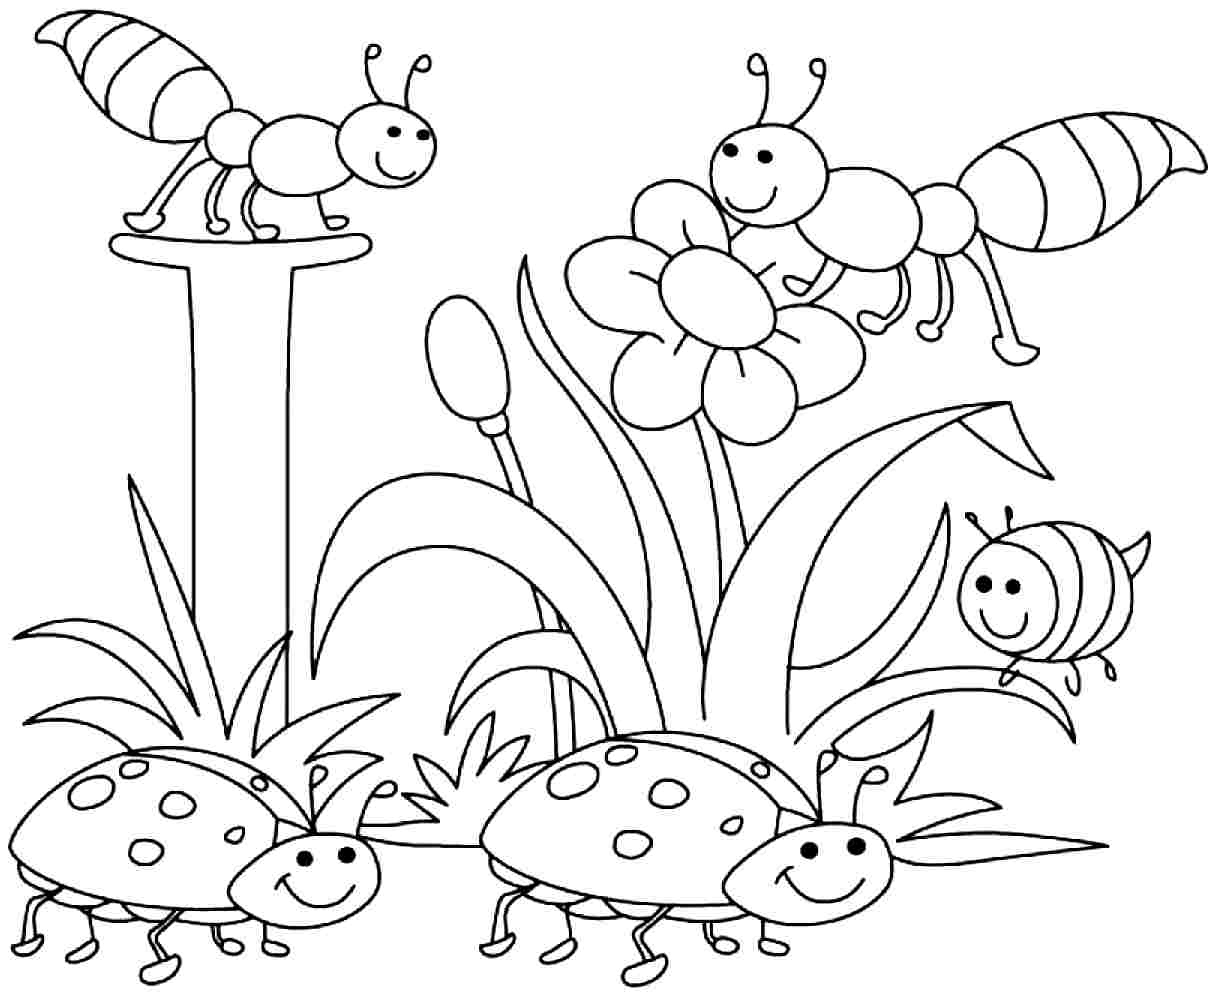 Free Printable Coloring Pages For Preschool   Coloring Home